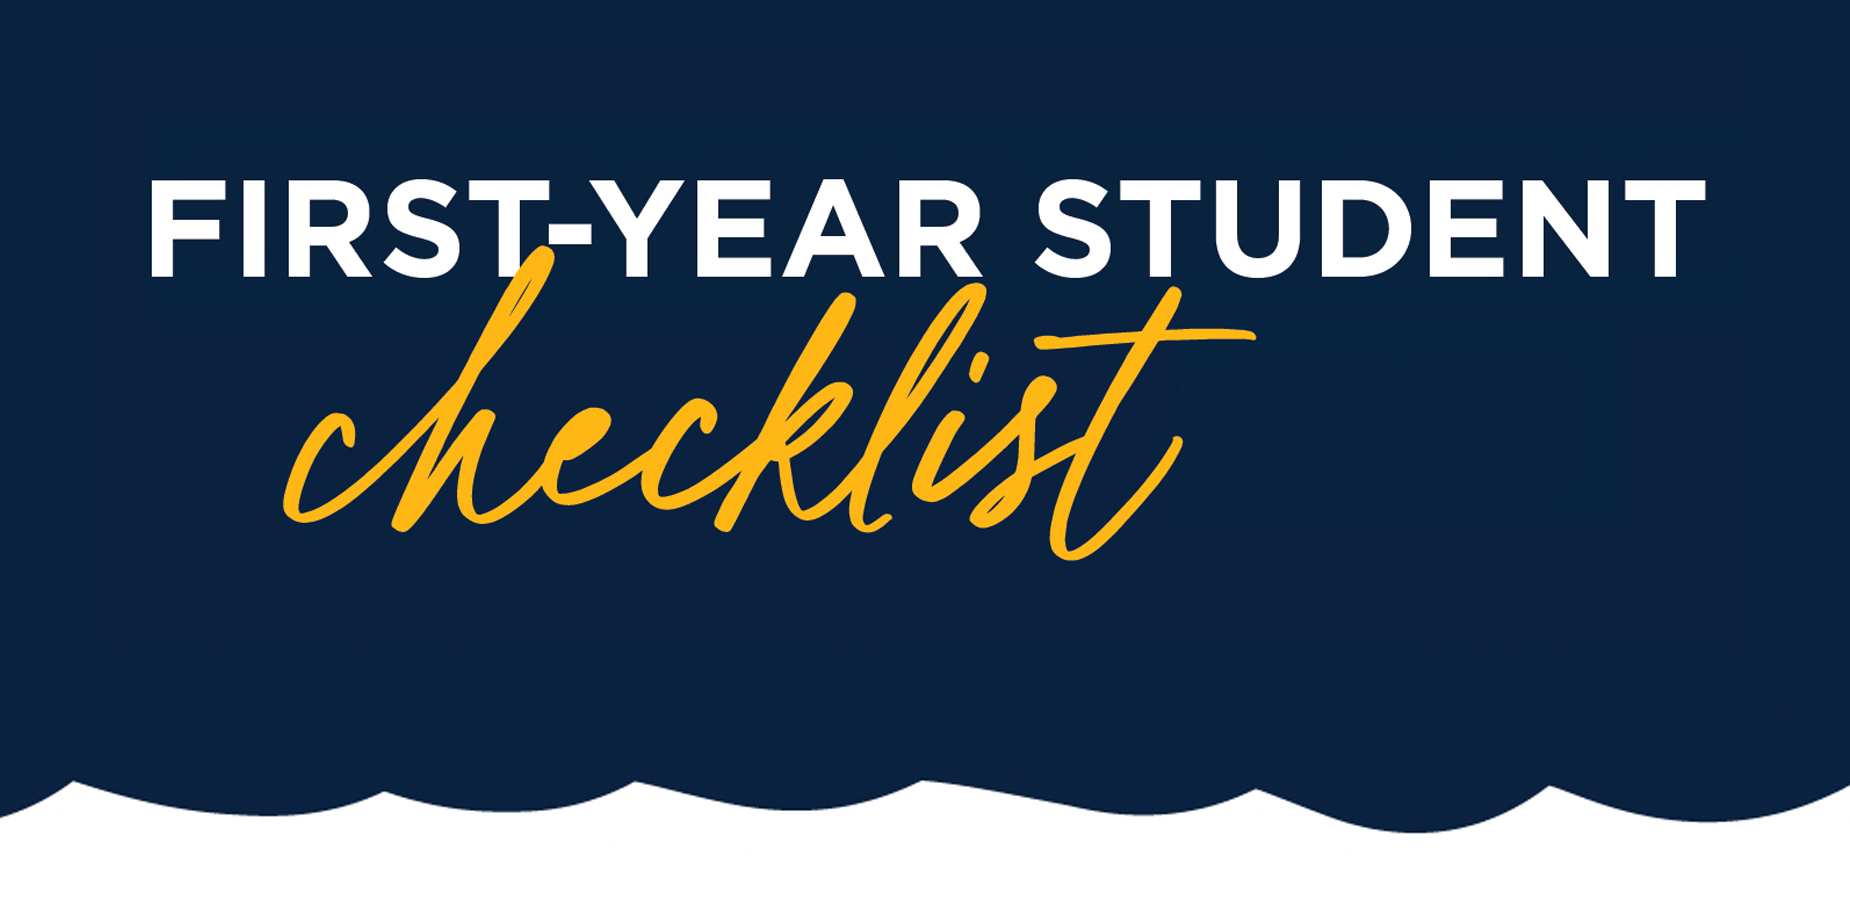 Accepted Student Checklist - First Year